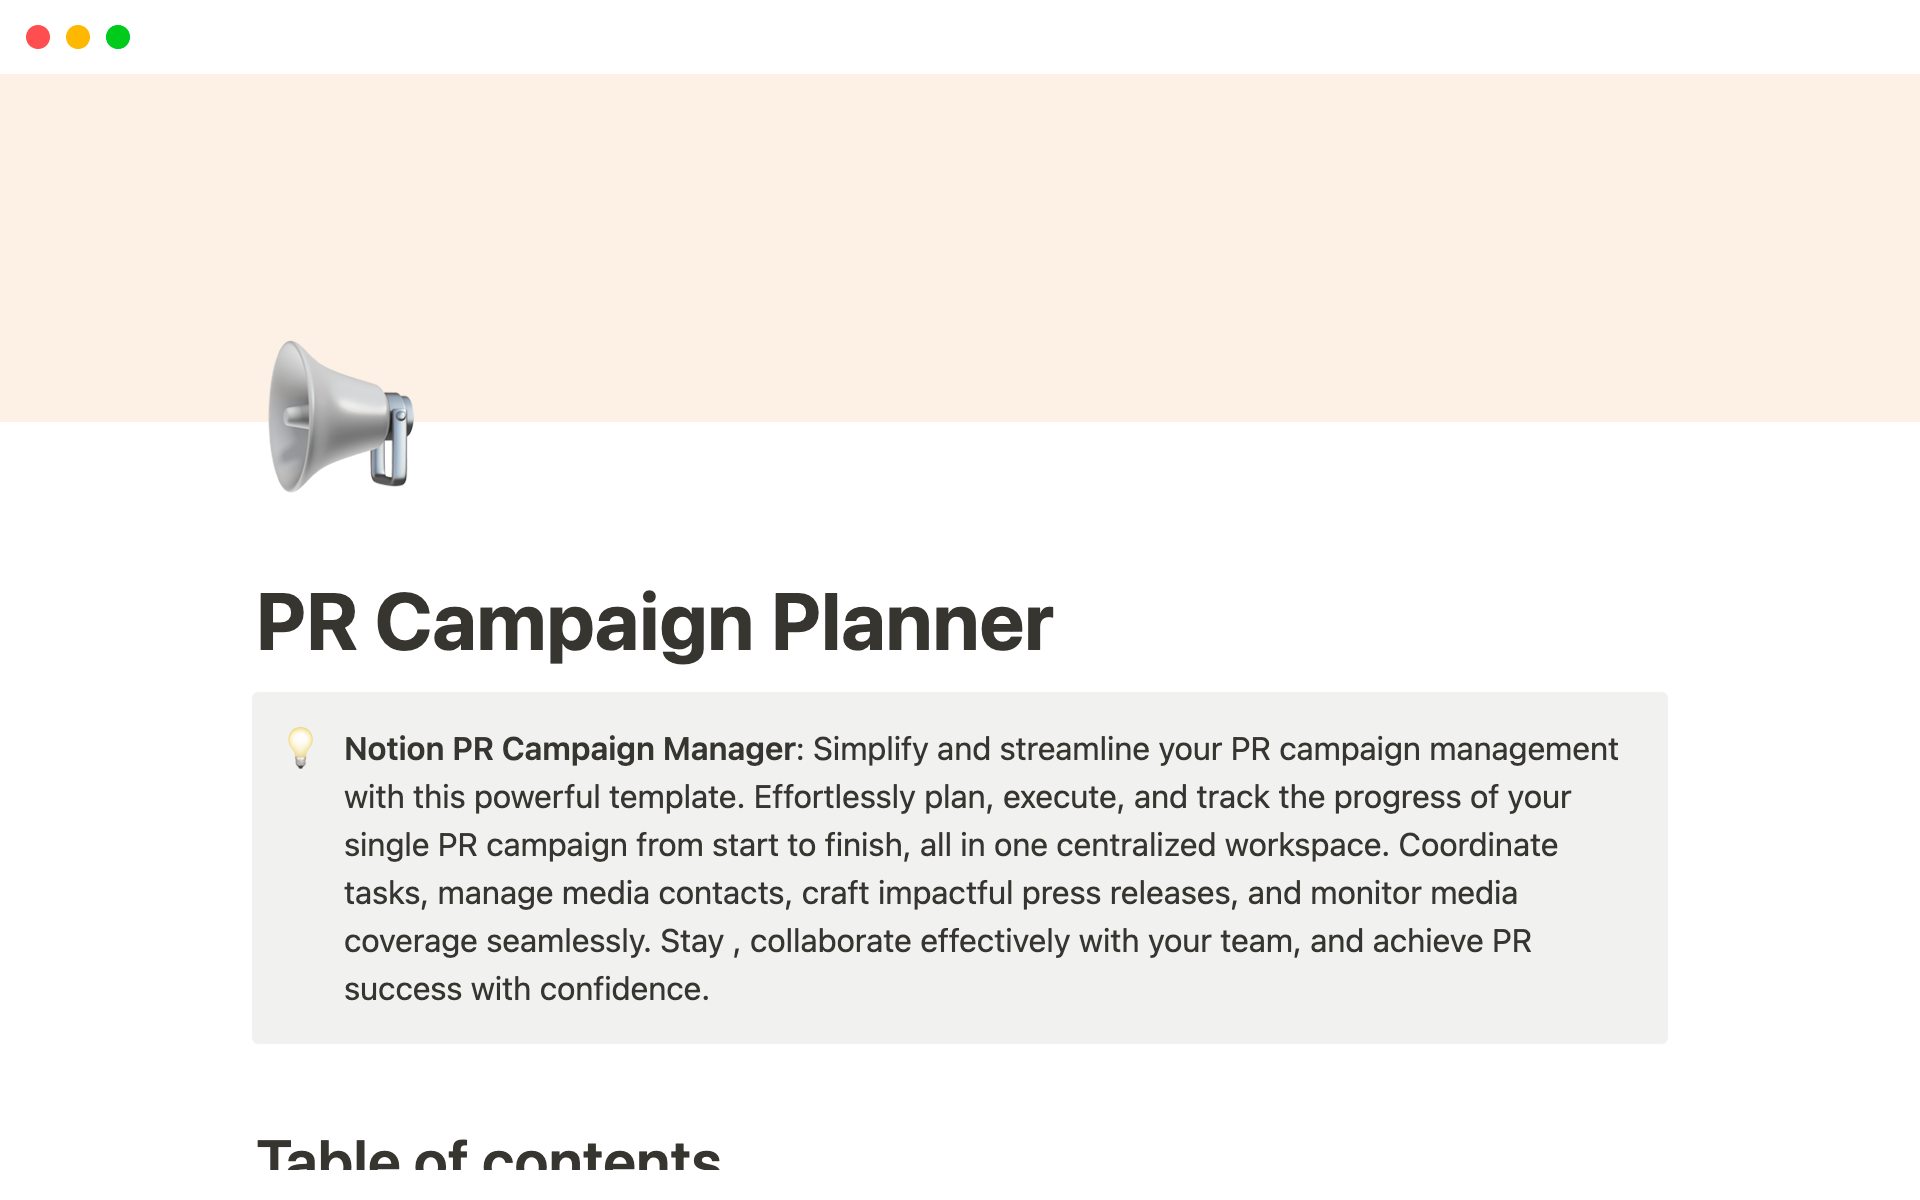 Simplify and streamline your PR campaign management with this powerful template. Effortlessly plan, execute, and track the progress of your single PR campaign from start to finish, all in one centralized workspace.